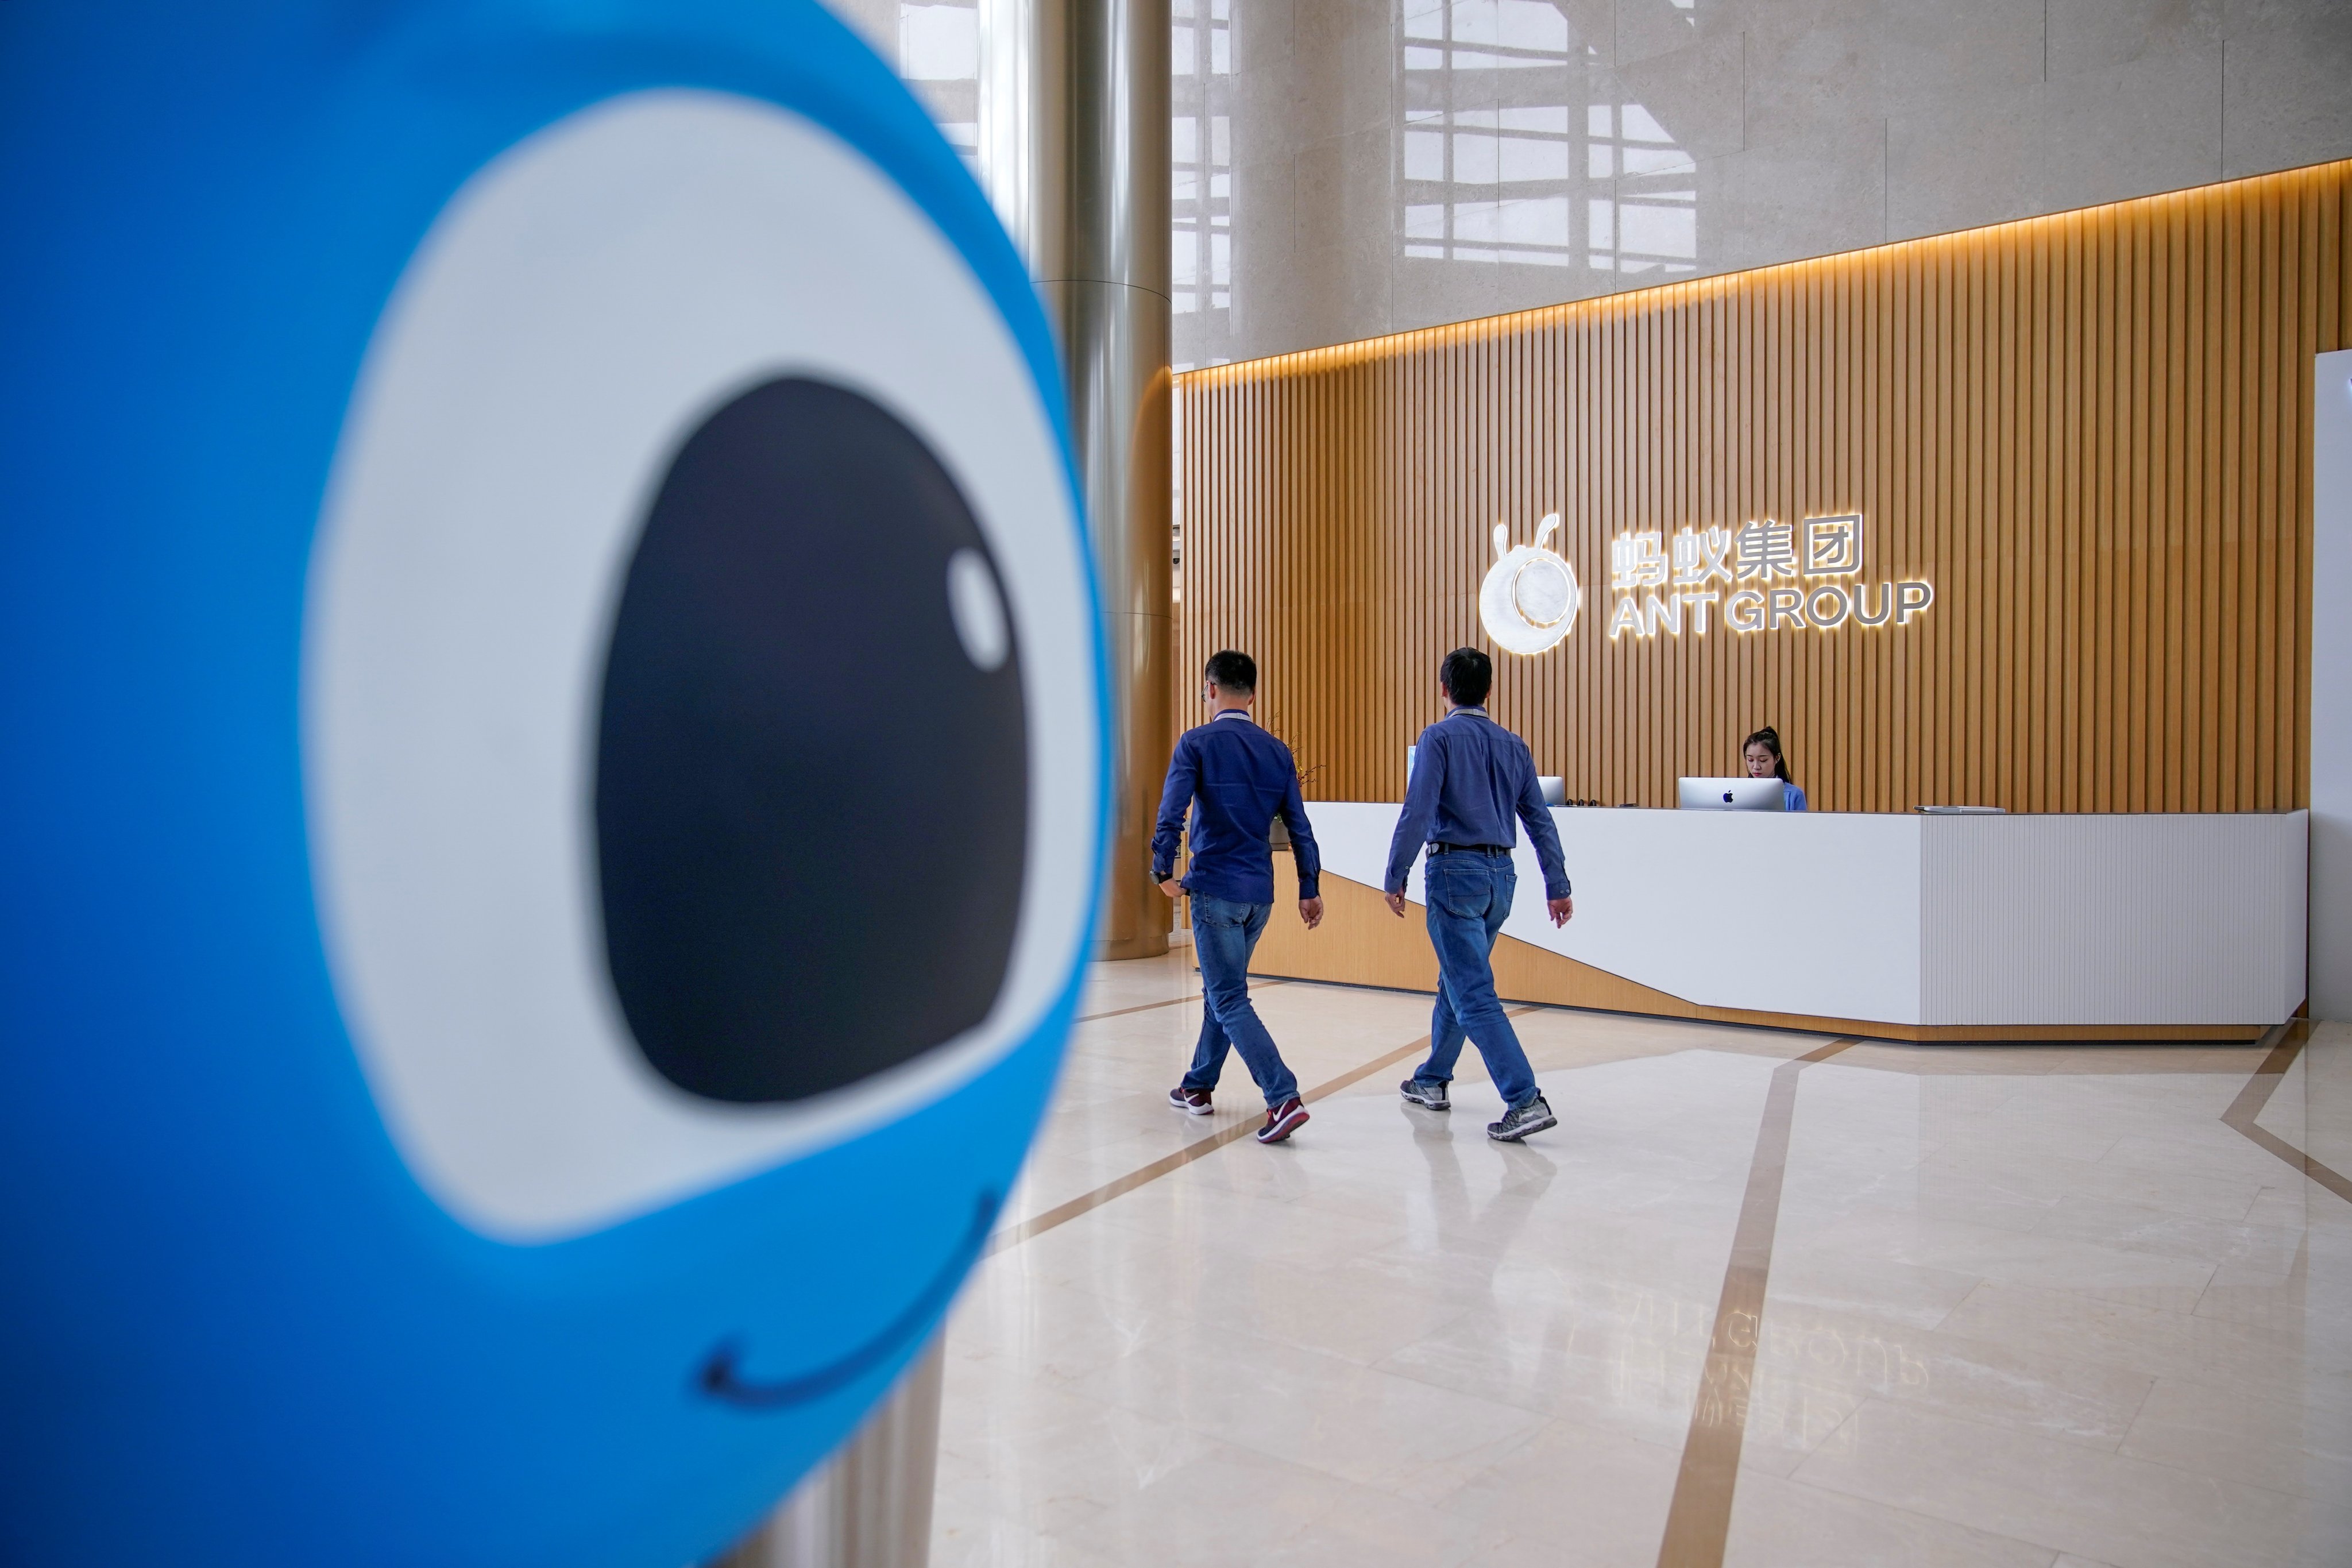 Employees walk through the lobby of Ant Group headquarters in Hangzhou, China, on October 29, 2020. Photo: Reuters